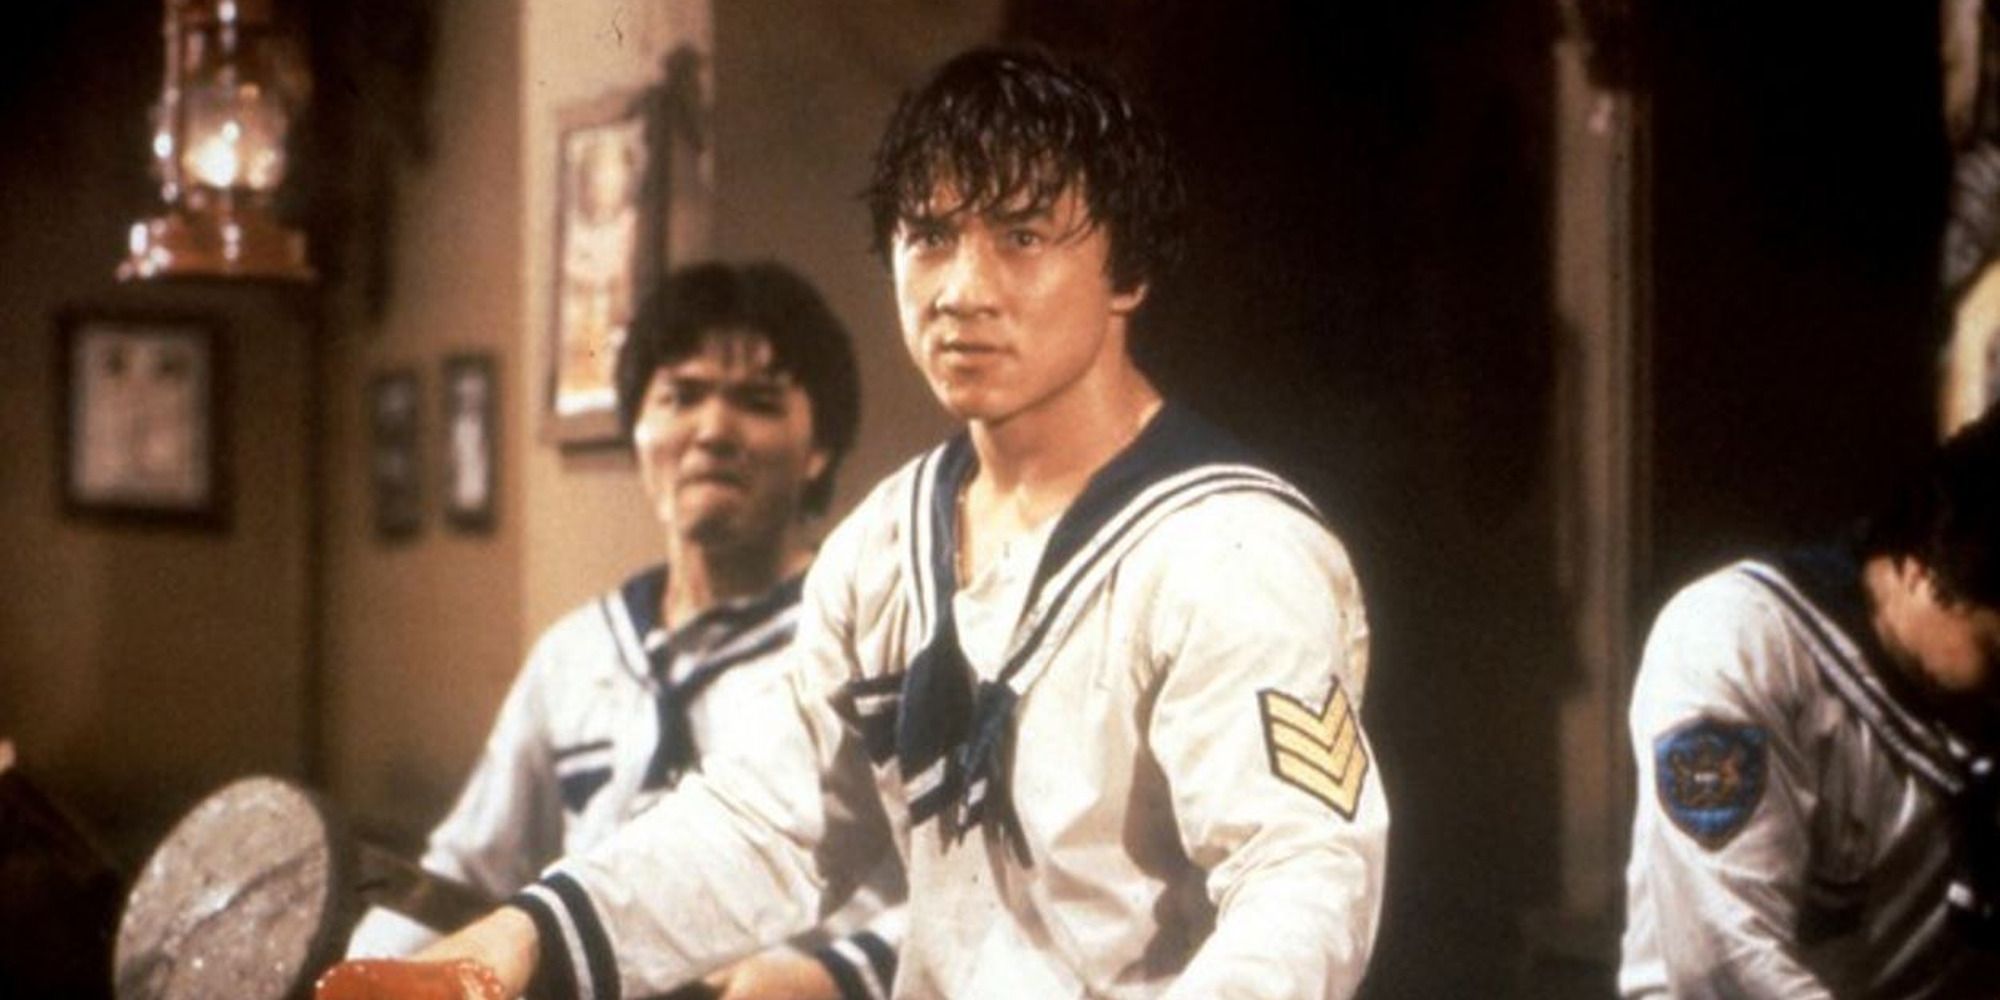 Jackie Chan in a sailor uniform getting ready to fight in 'Project A'